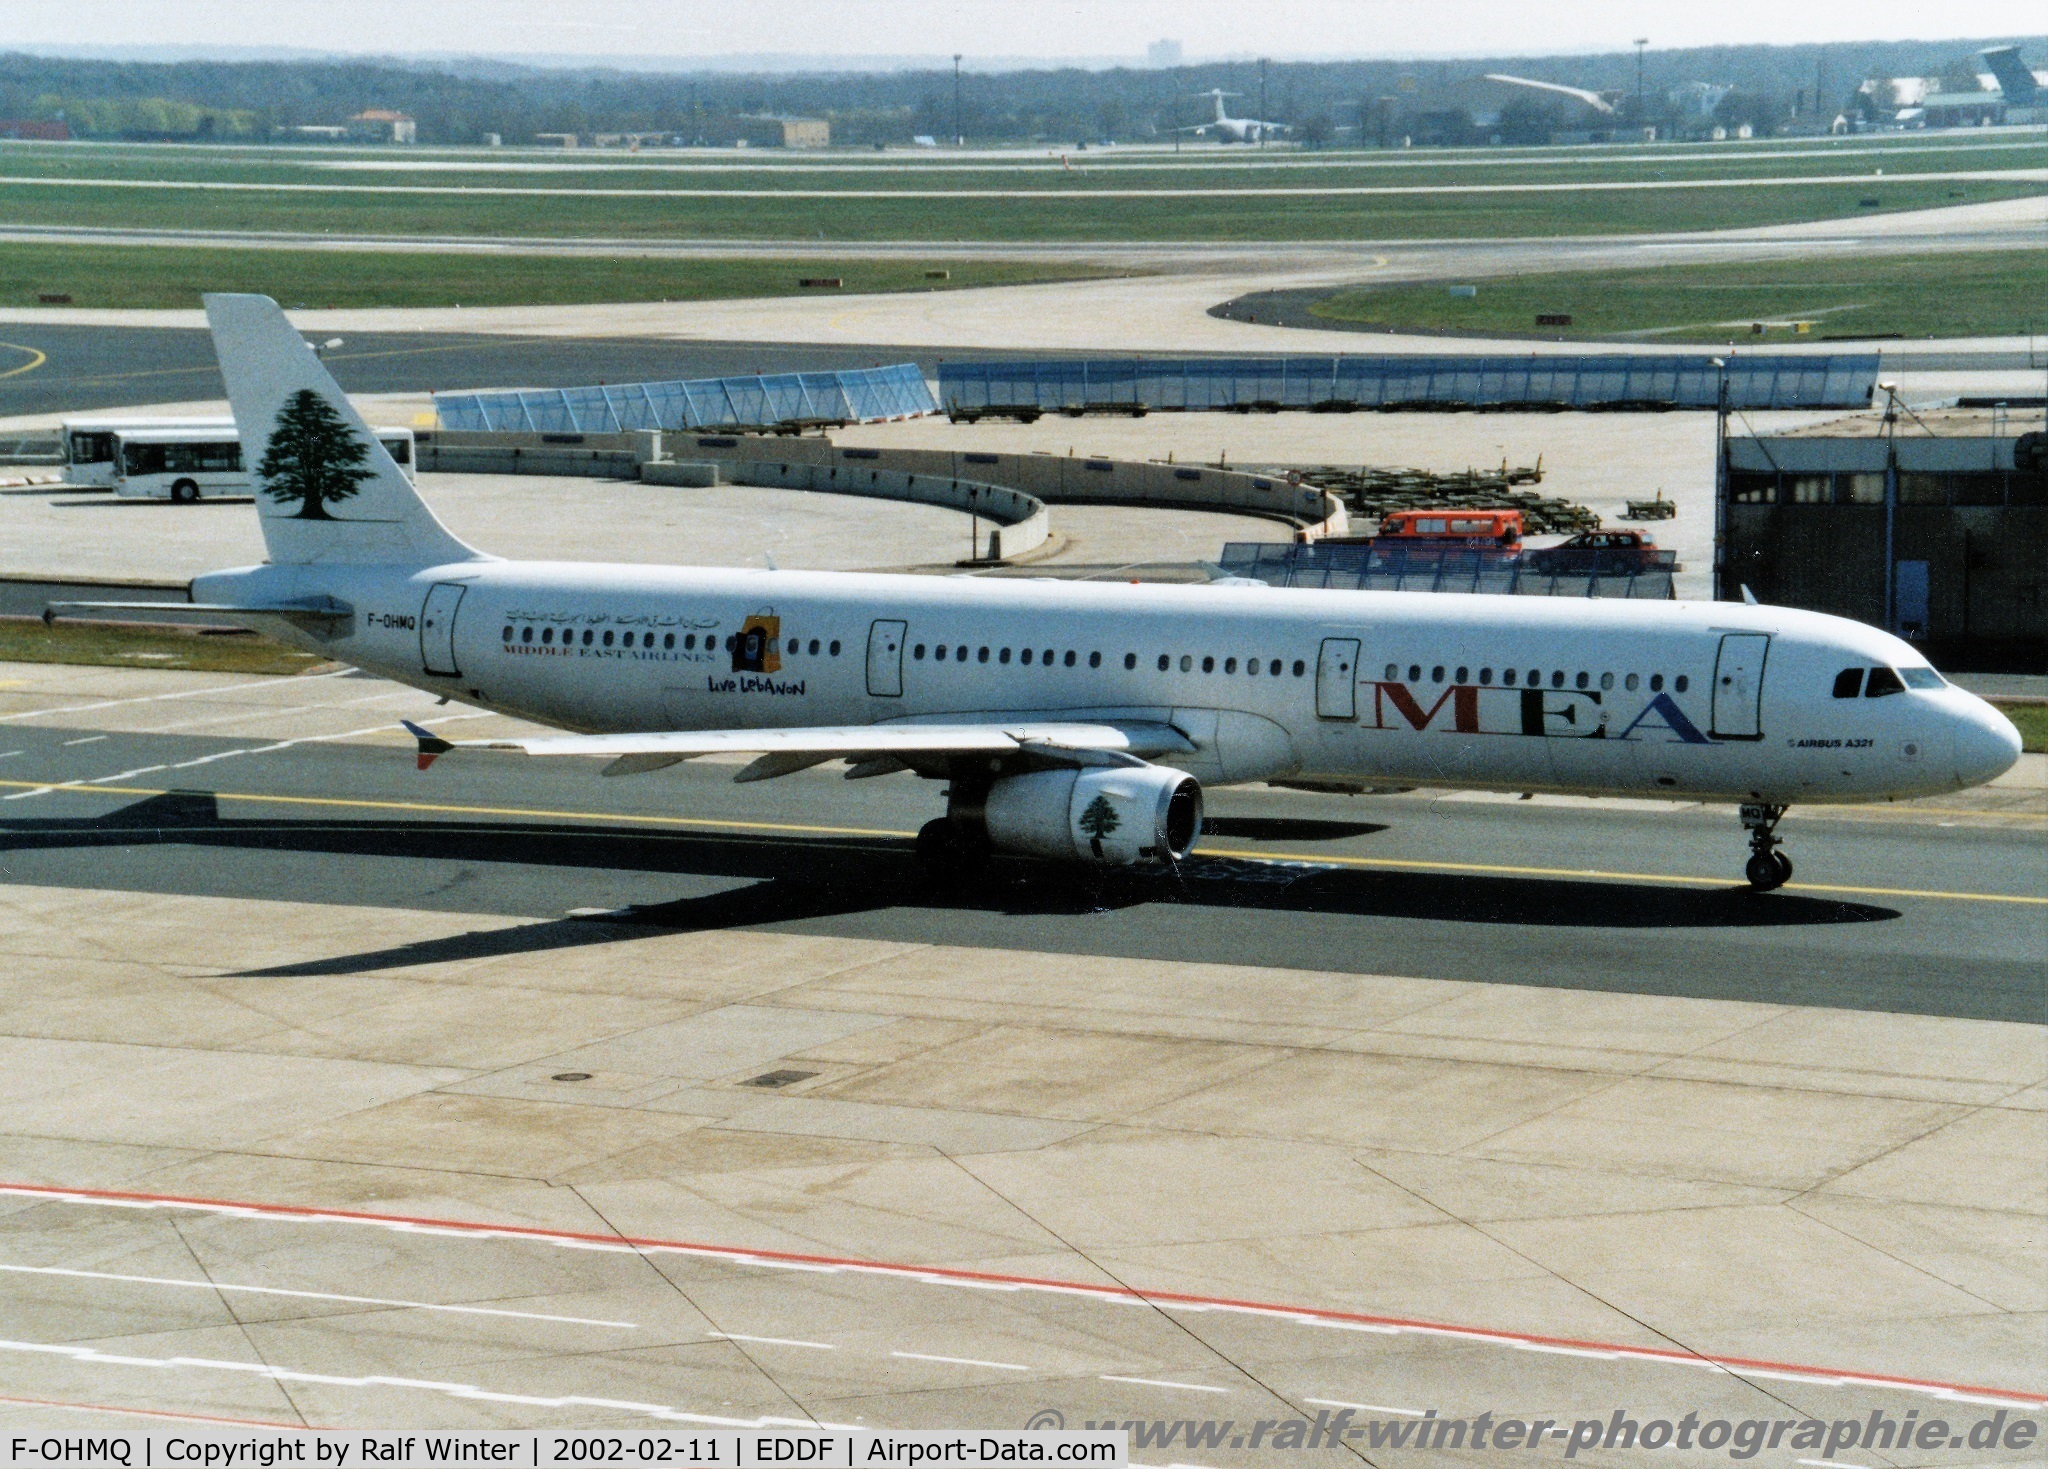 F-OHMQ, 1997 Airbus A321-231 C/N 668, Airbus A321-231 - ME MEA Middle East Airlines MEA 'Live Lebanon' - 668 - F-OHMQ - 02.2002 - FRA